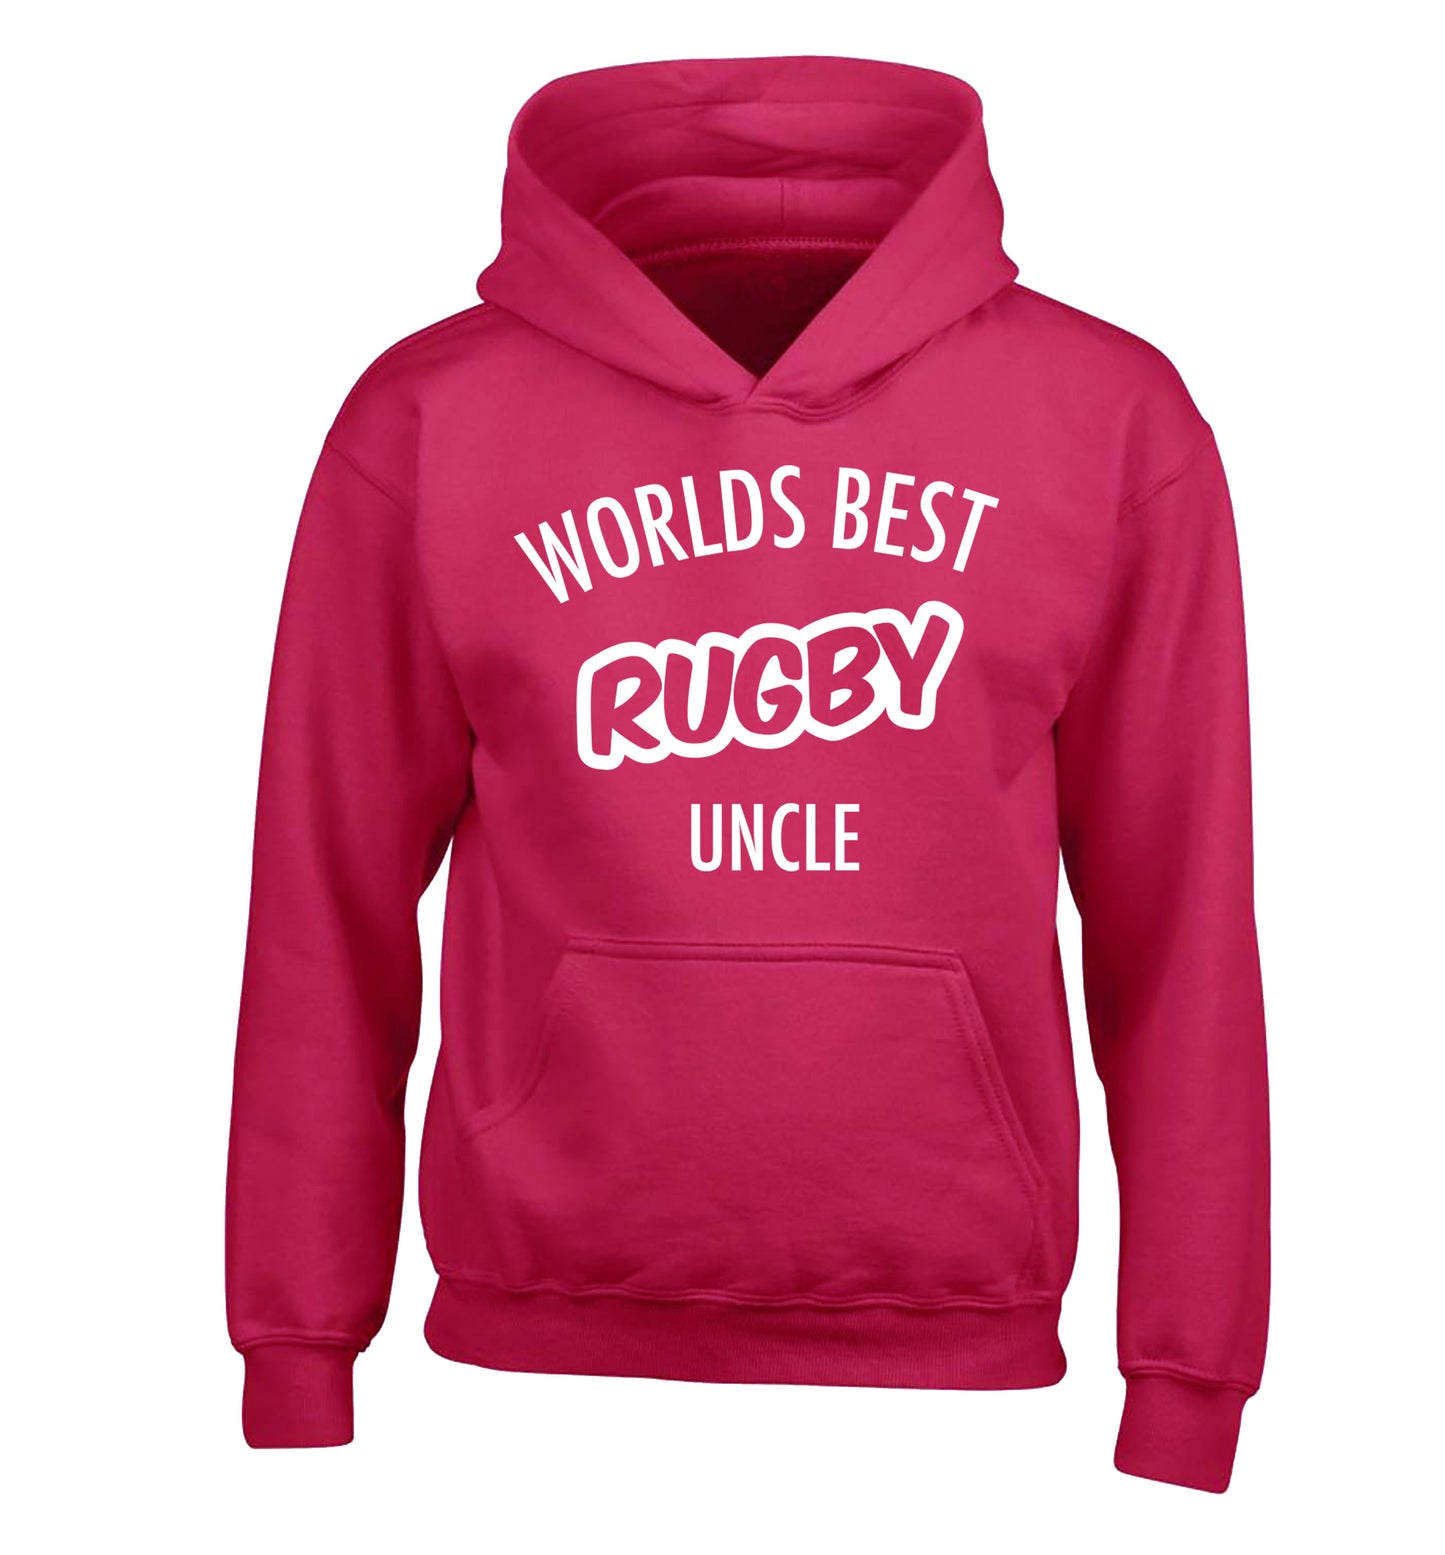 Worlds best rugby uncle children's pink hoodie 12-13 Years